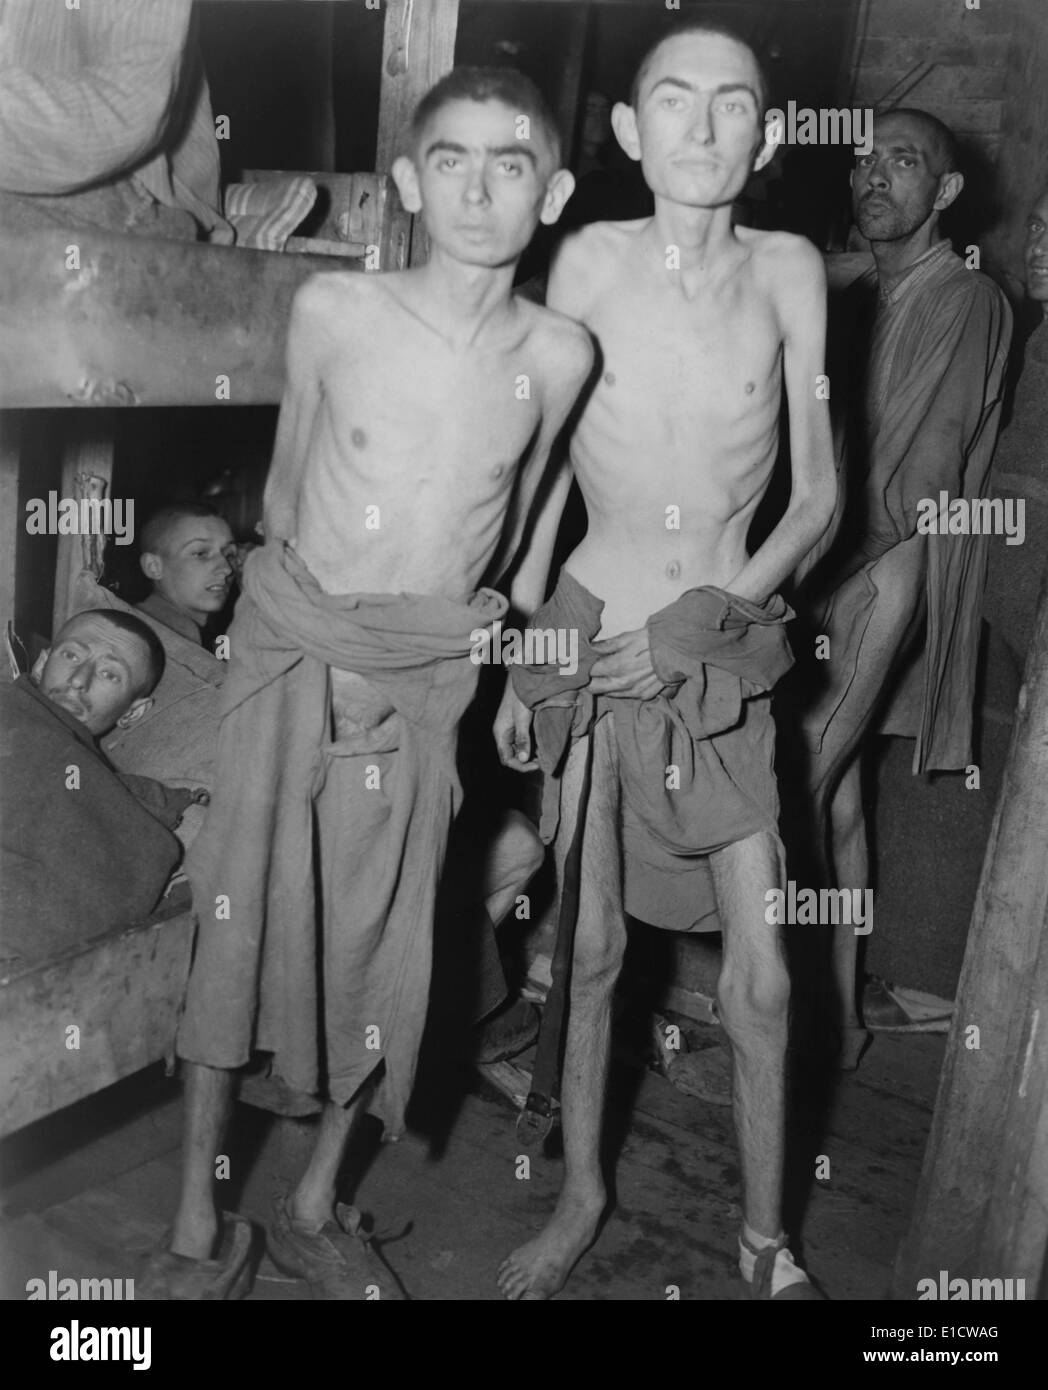 jewish-inmates-of-the-amphing-concentration-camp-after-liberation-E1CWAG.jpg